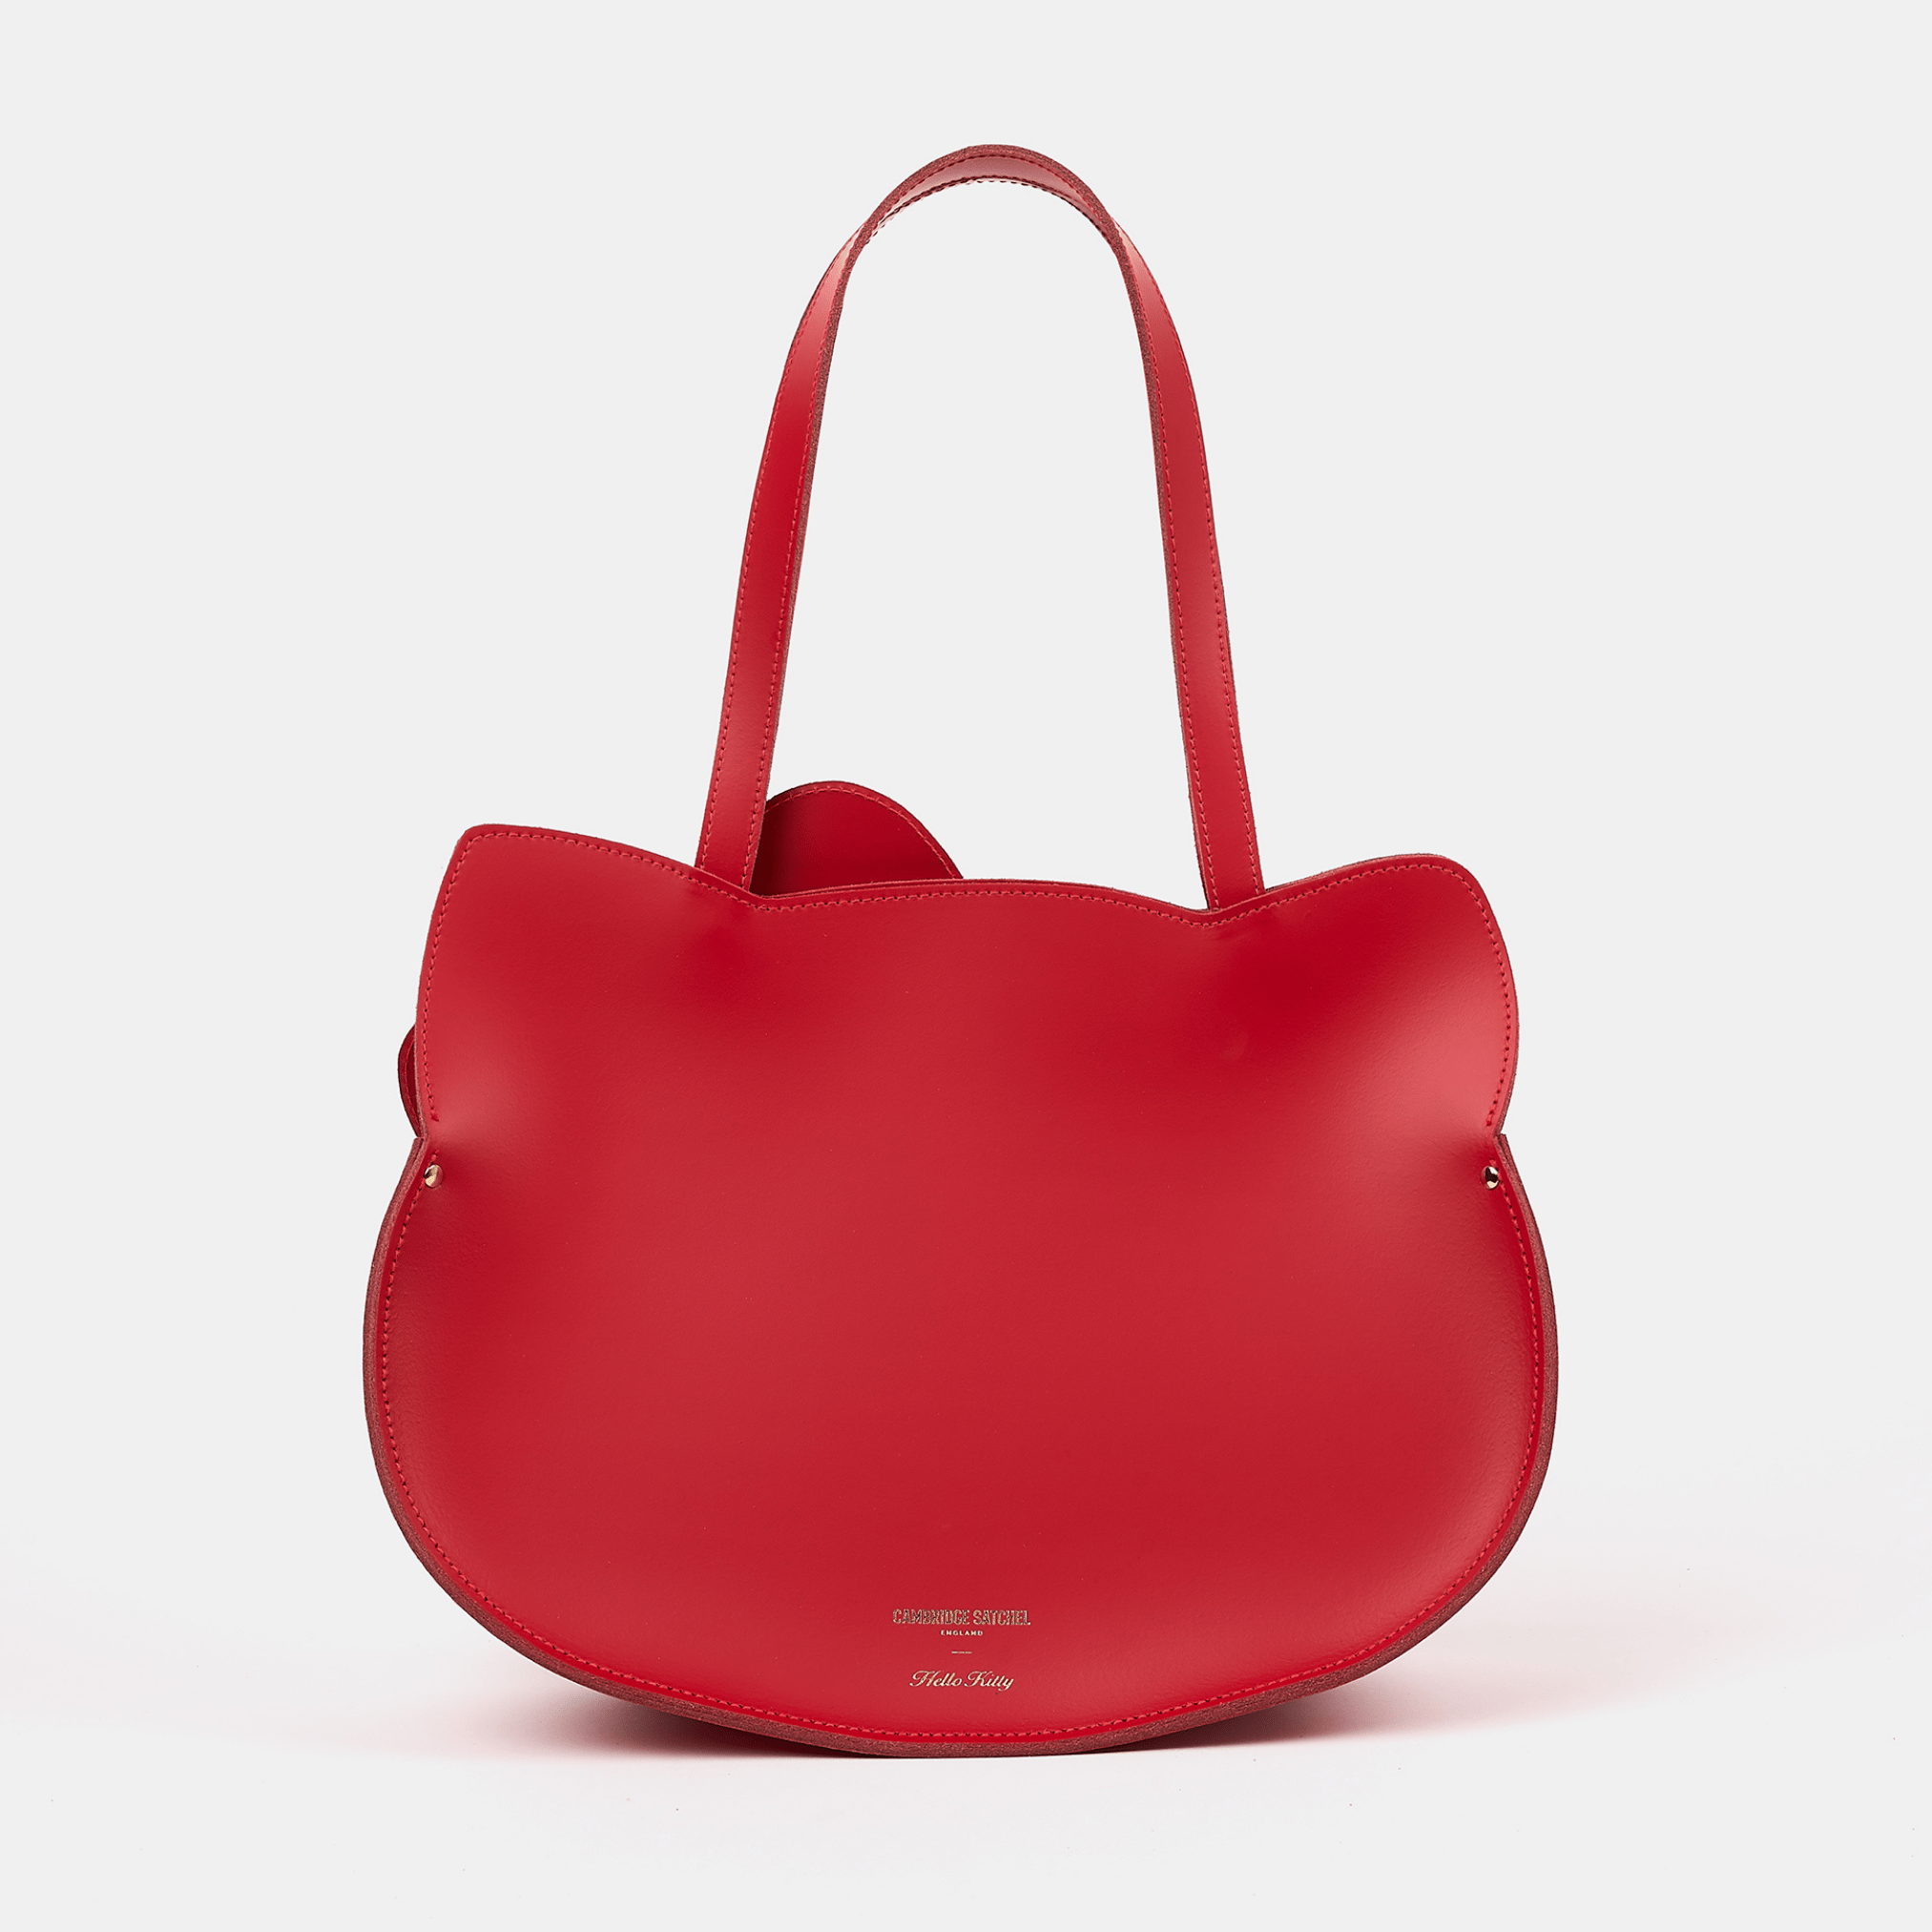 The Hello Kitty Face Tote - Red - Cambridge Satchel